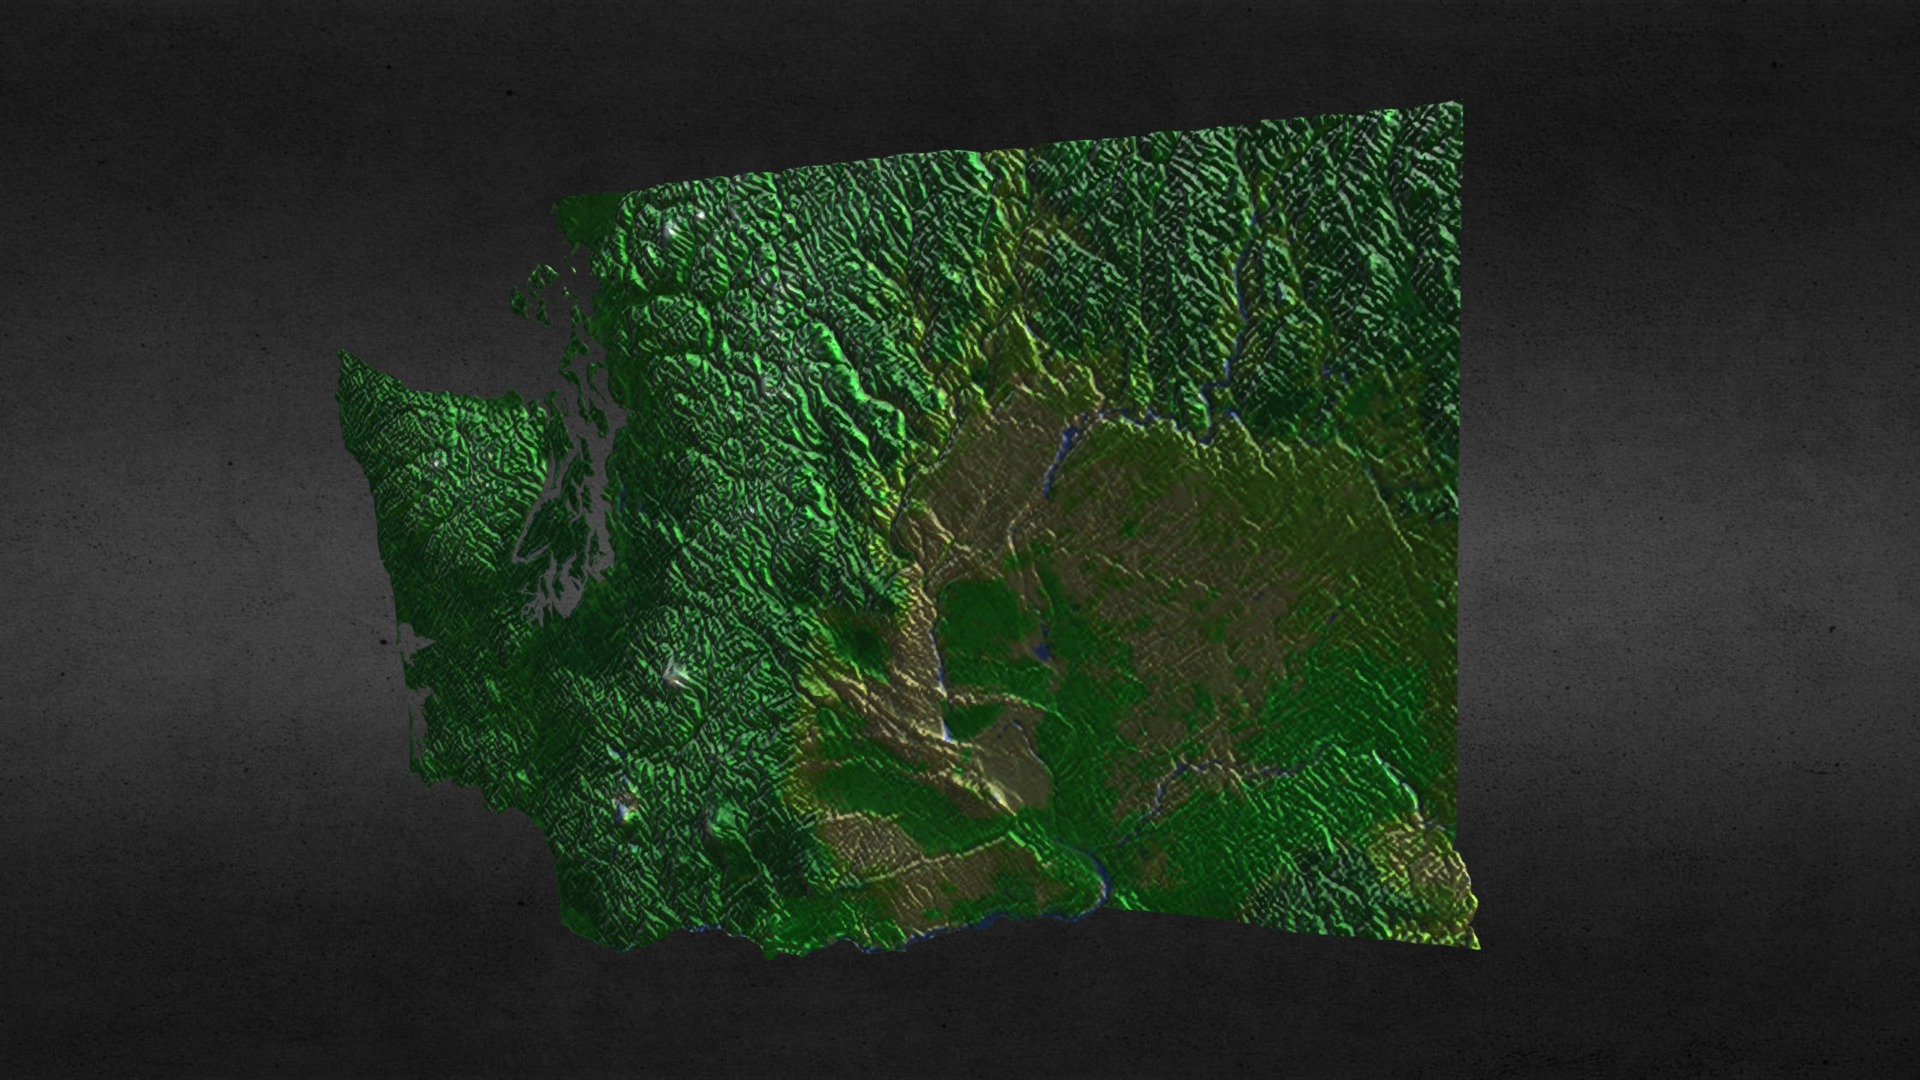 3D model Washington State - This is a 3D model of the Washington State. The 3D model is about a green leaf on a black surface.